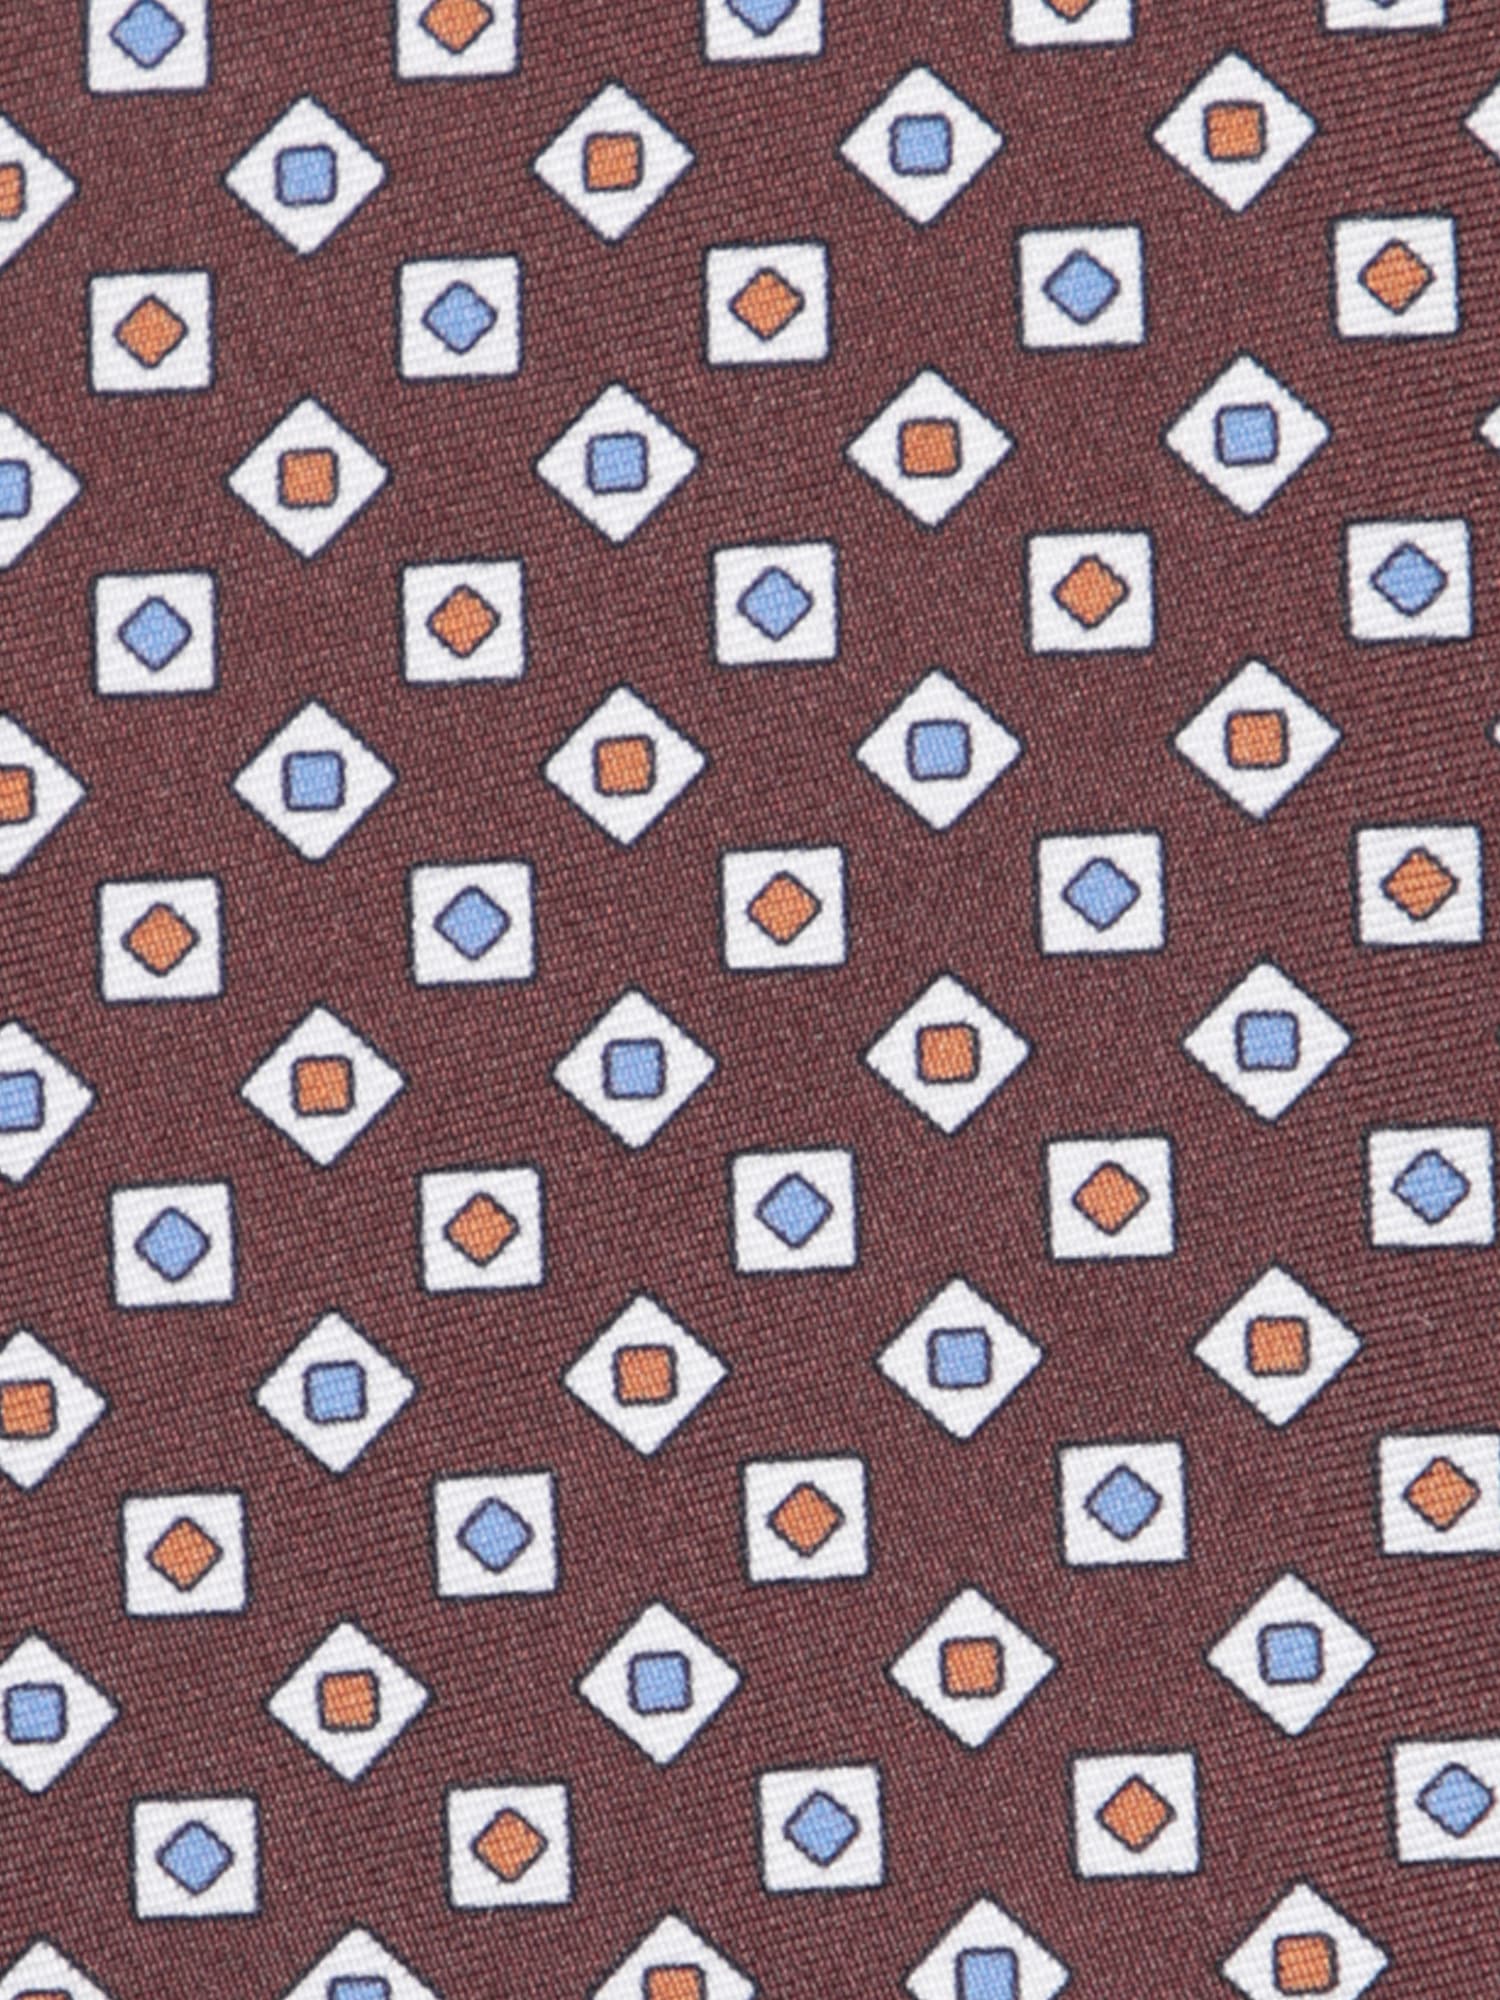 Shop Canali Patterned Multicolor/brown Tie In Blue